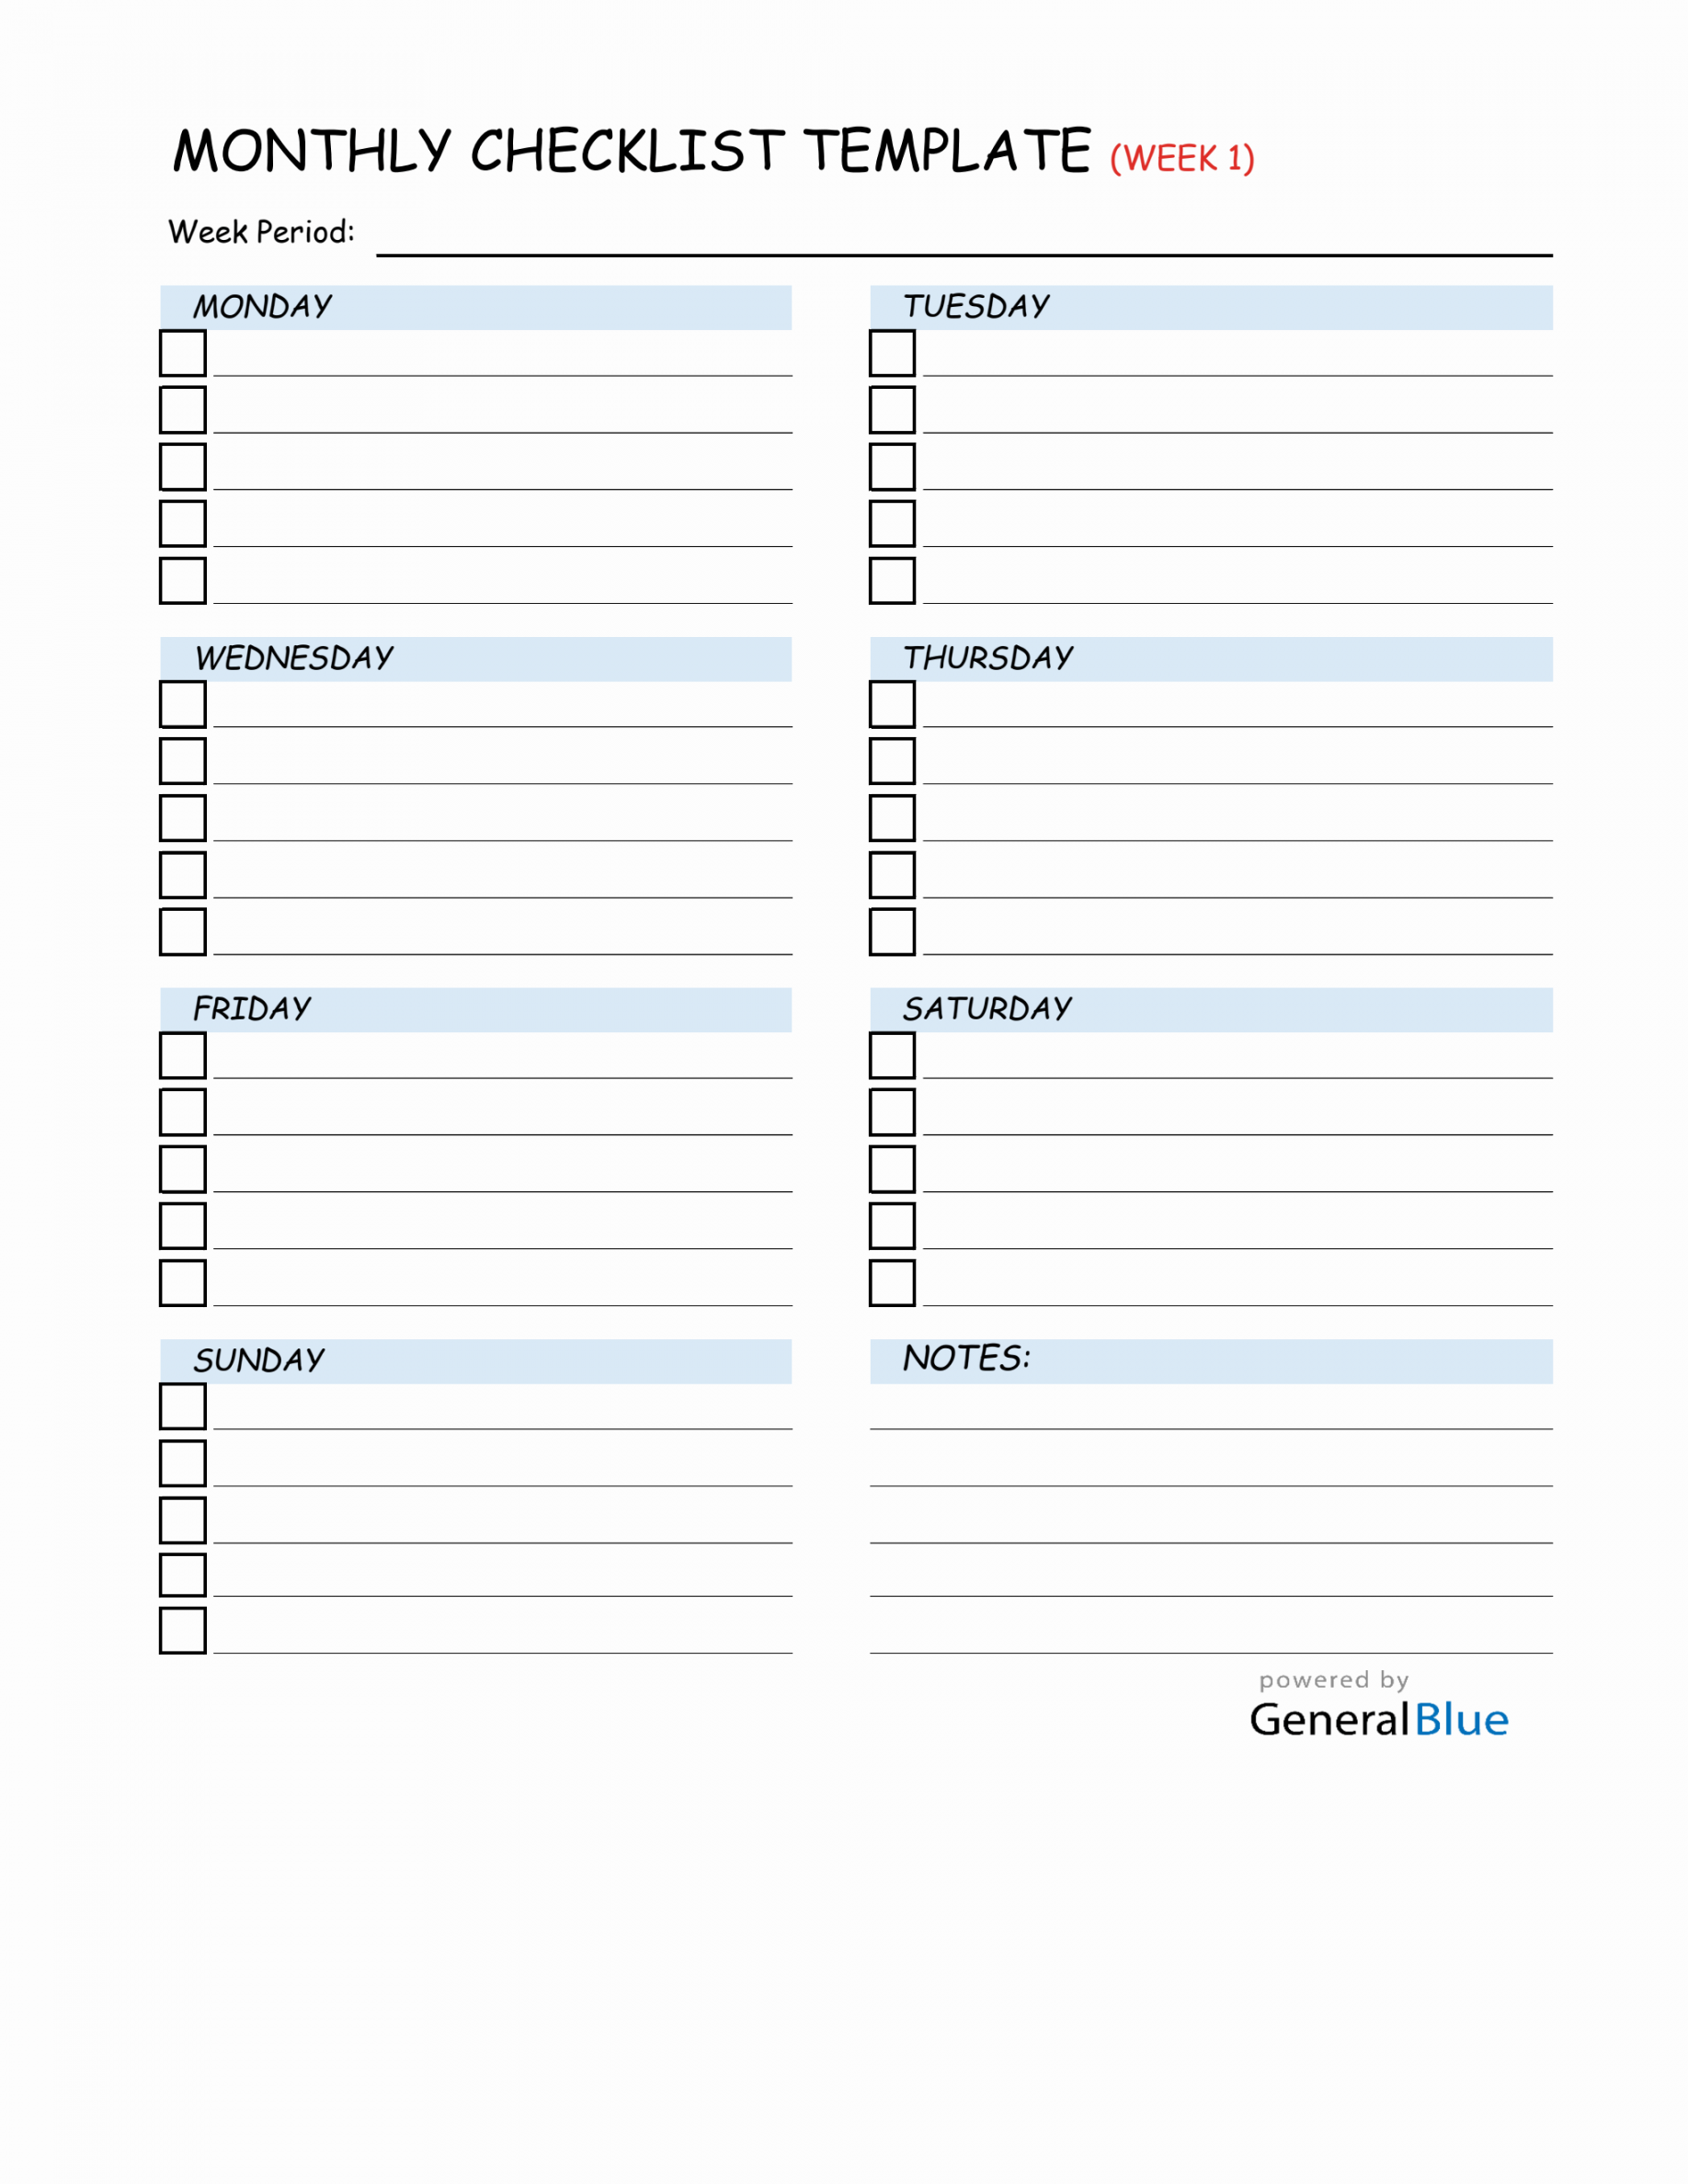 Monthly Checklist Template in Excel - FREE Printables - Monthly Checklist